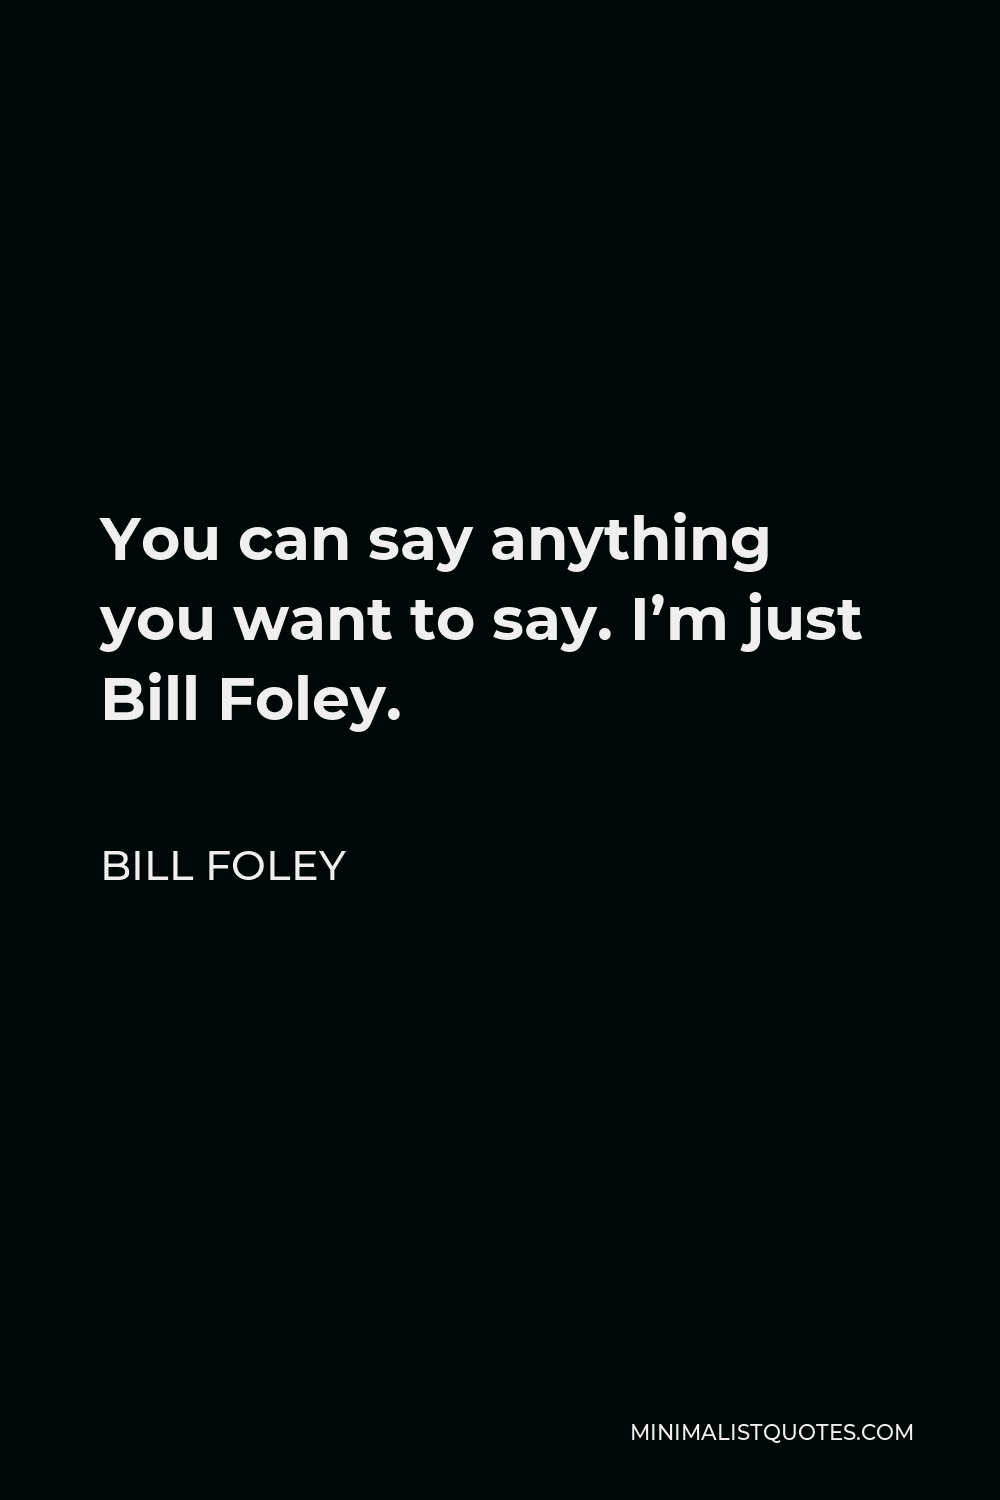 Bill Foley Quote - You can say anything you want to say. I’m just Bill Foley.